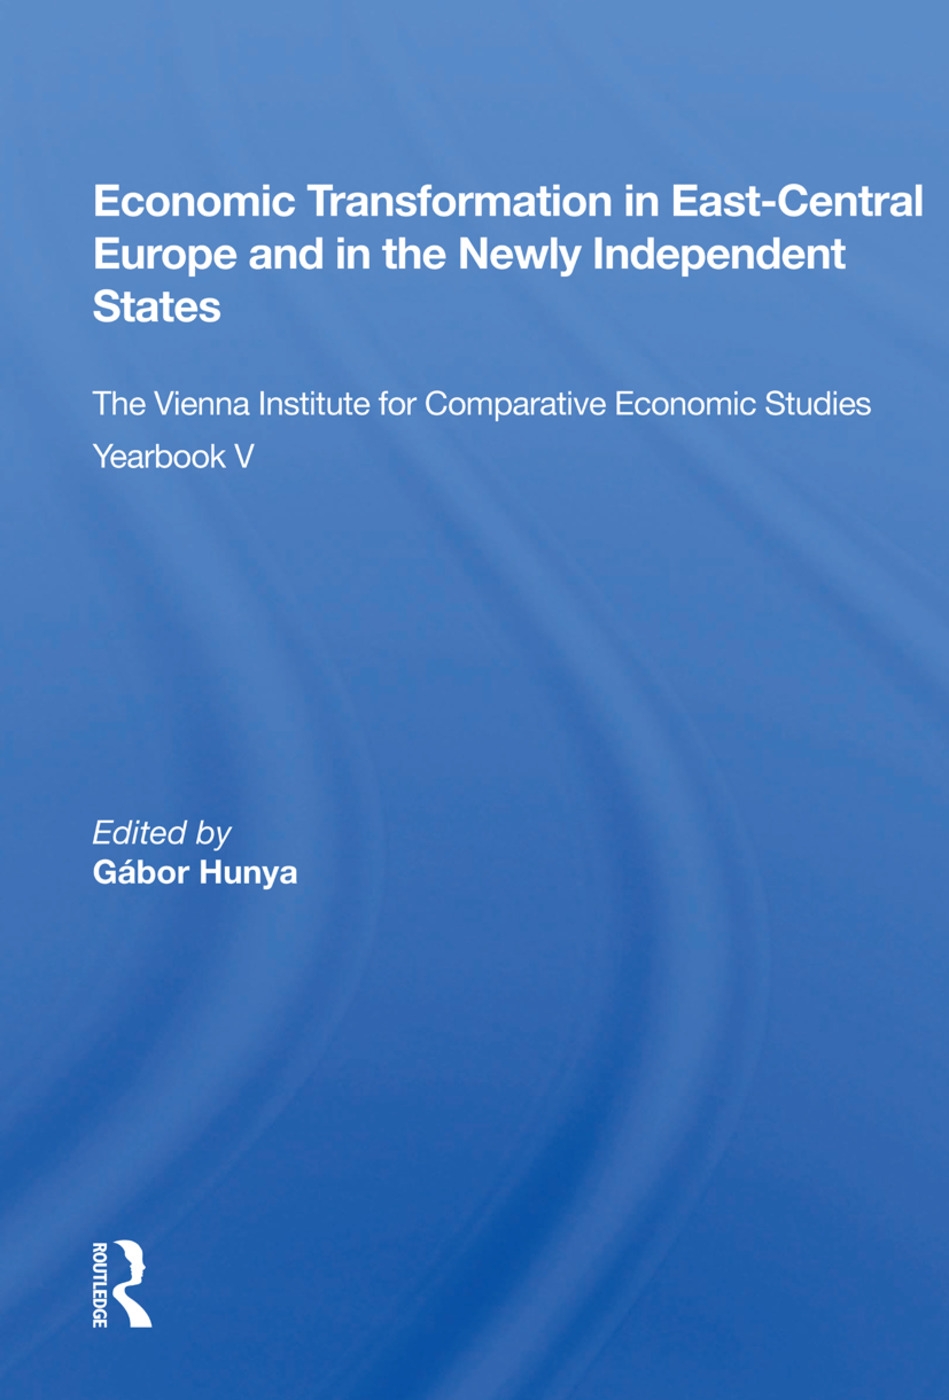 Economic Transformation in East-Central Europe and in the Newly Independent States: The Vienna Institute for Comparative Economic Studies Yearbook V